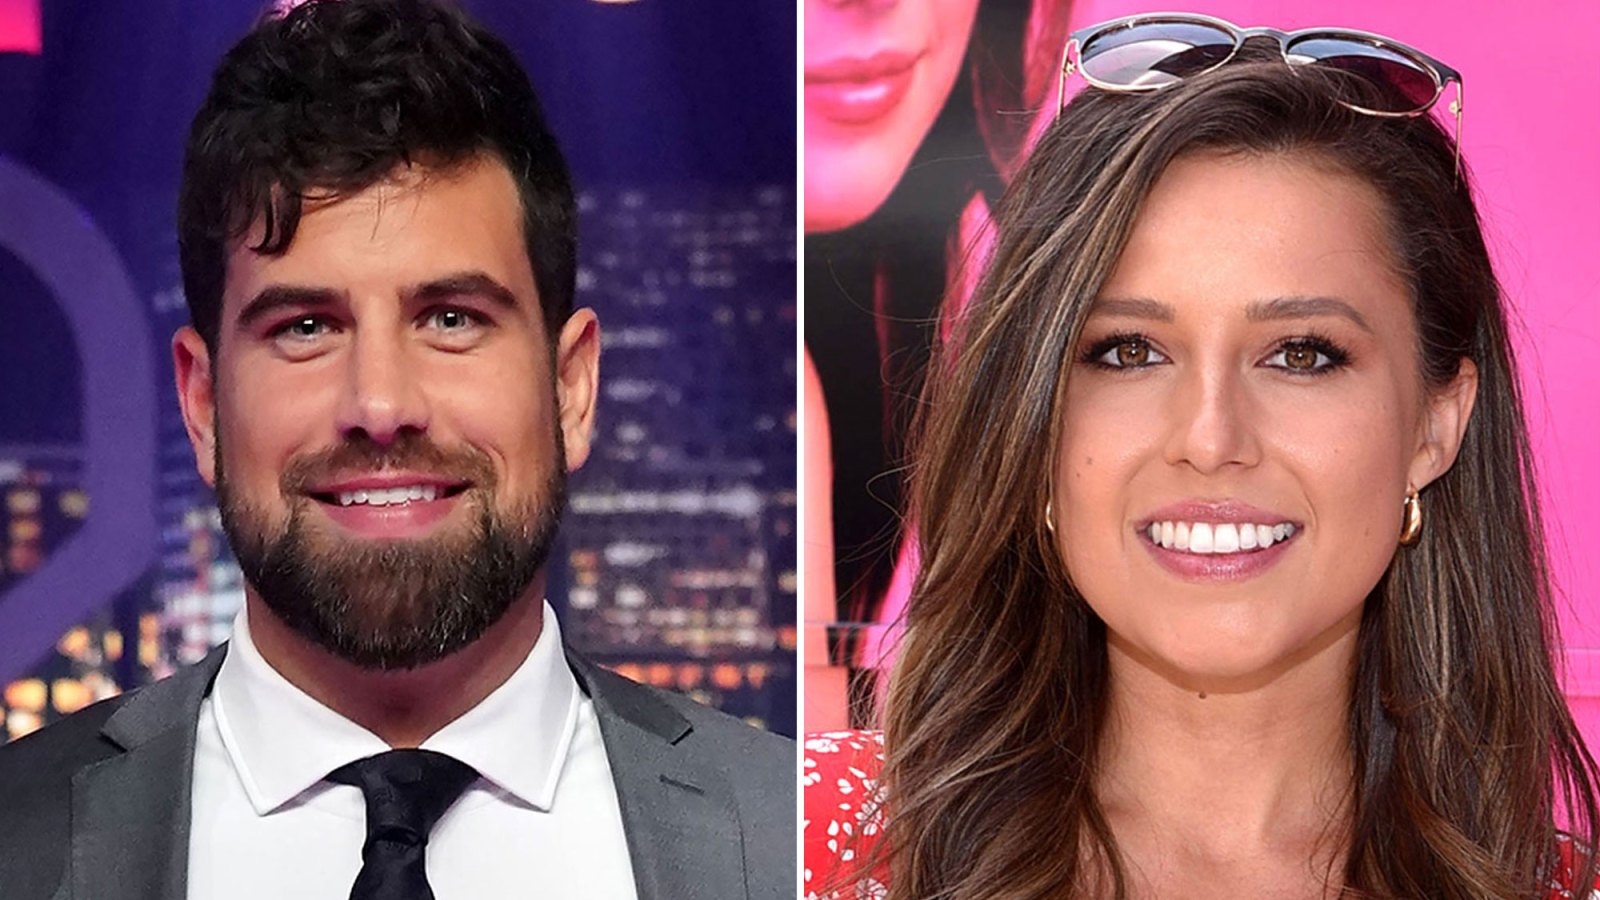 Blake Moynes Is Avoiding Roses After Katie Thurston Split But Hints He’s Ready to Date